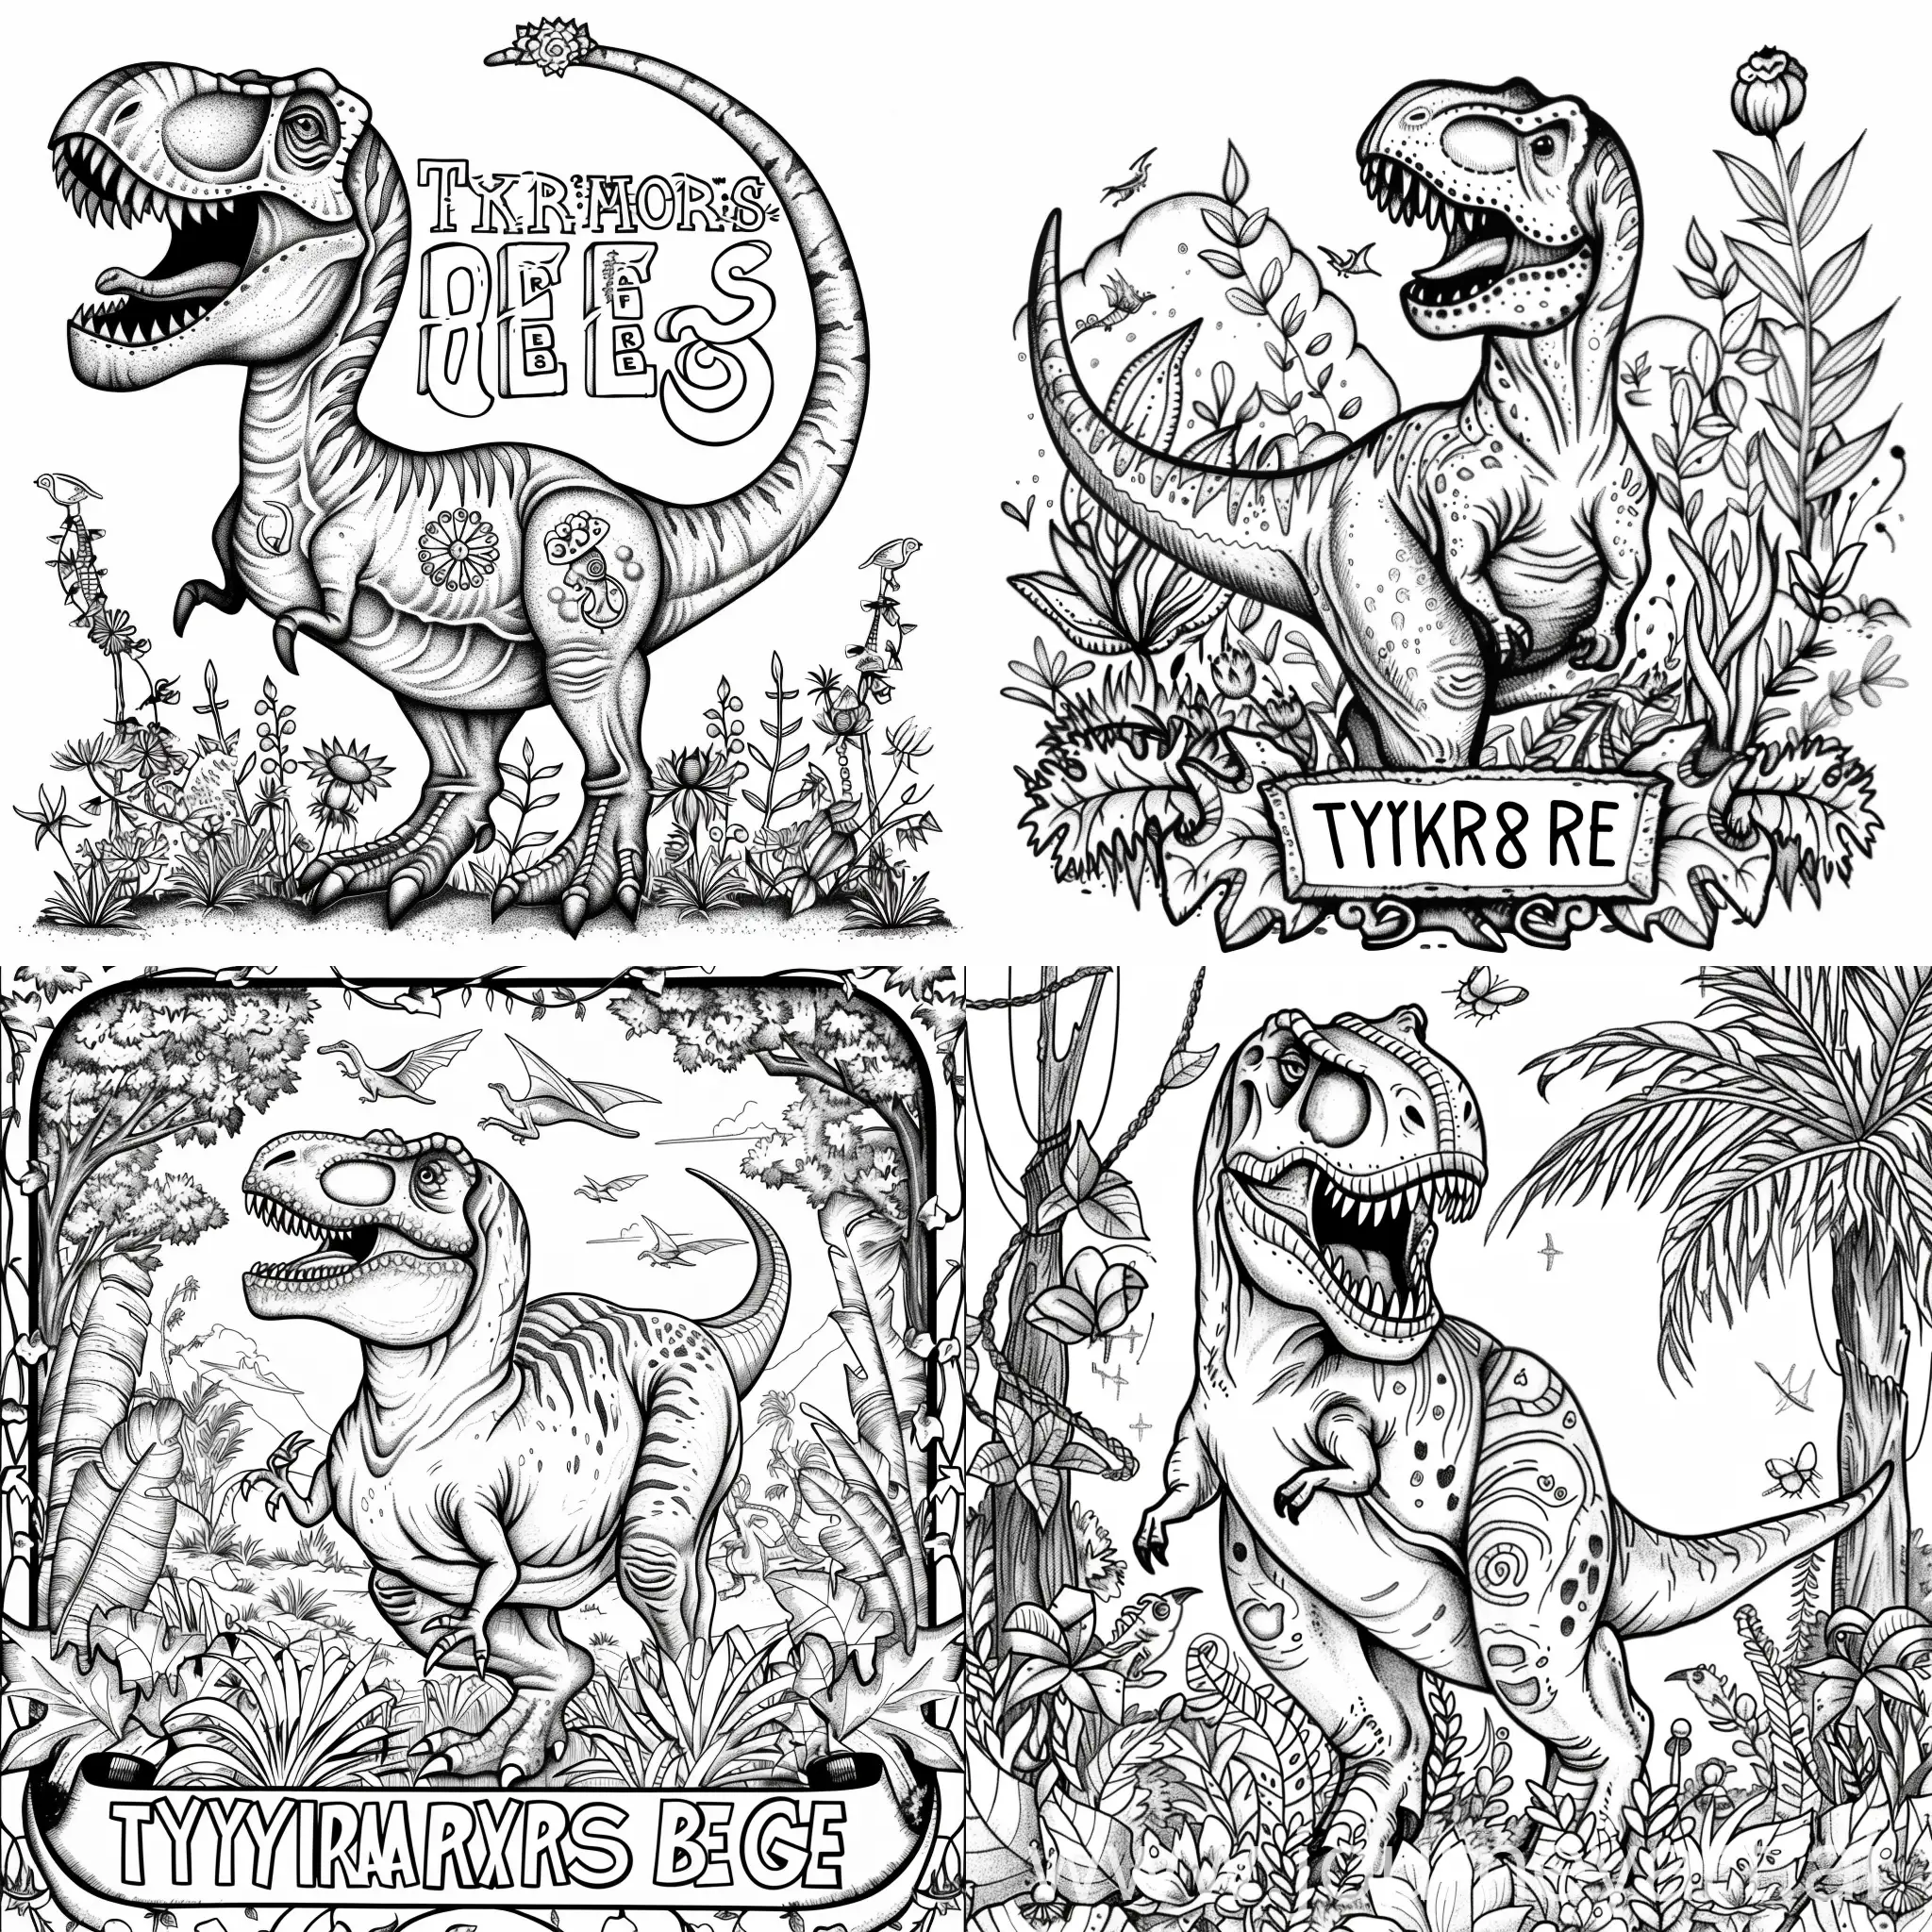 Adorable-Black-and-White-Tyrannosaurus-Rex-Coloring-Page-for-Kids